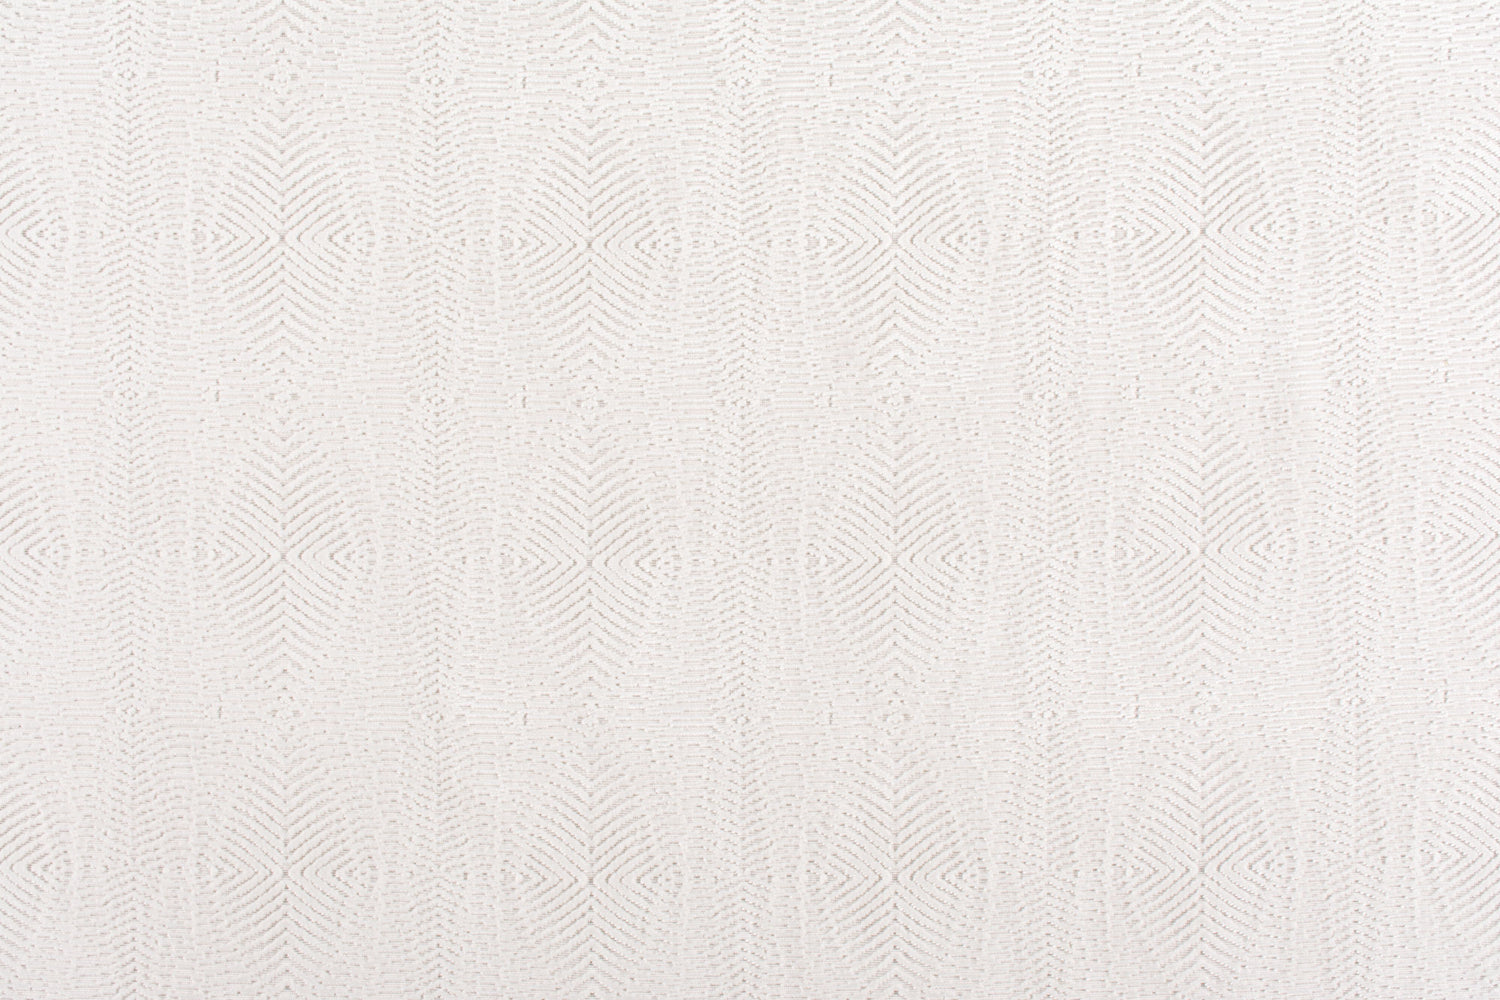 Cava fabric in ivory color - pattern number V4 00014020 - by Scalamandre in the Old World Weavers collection